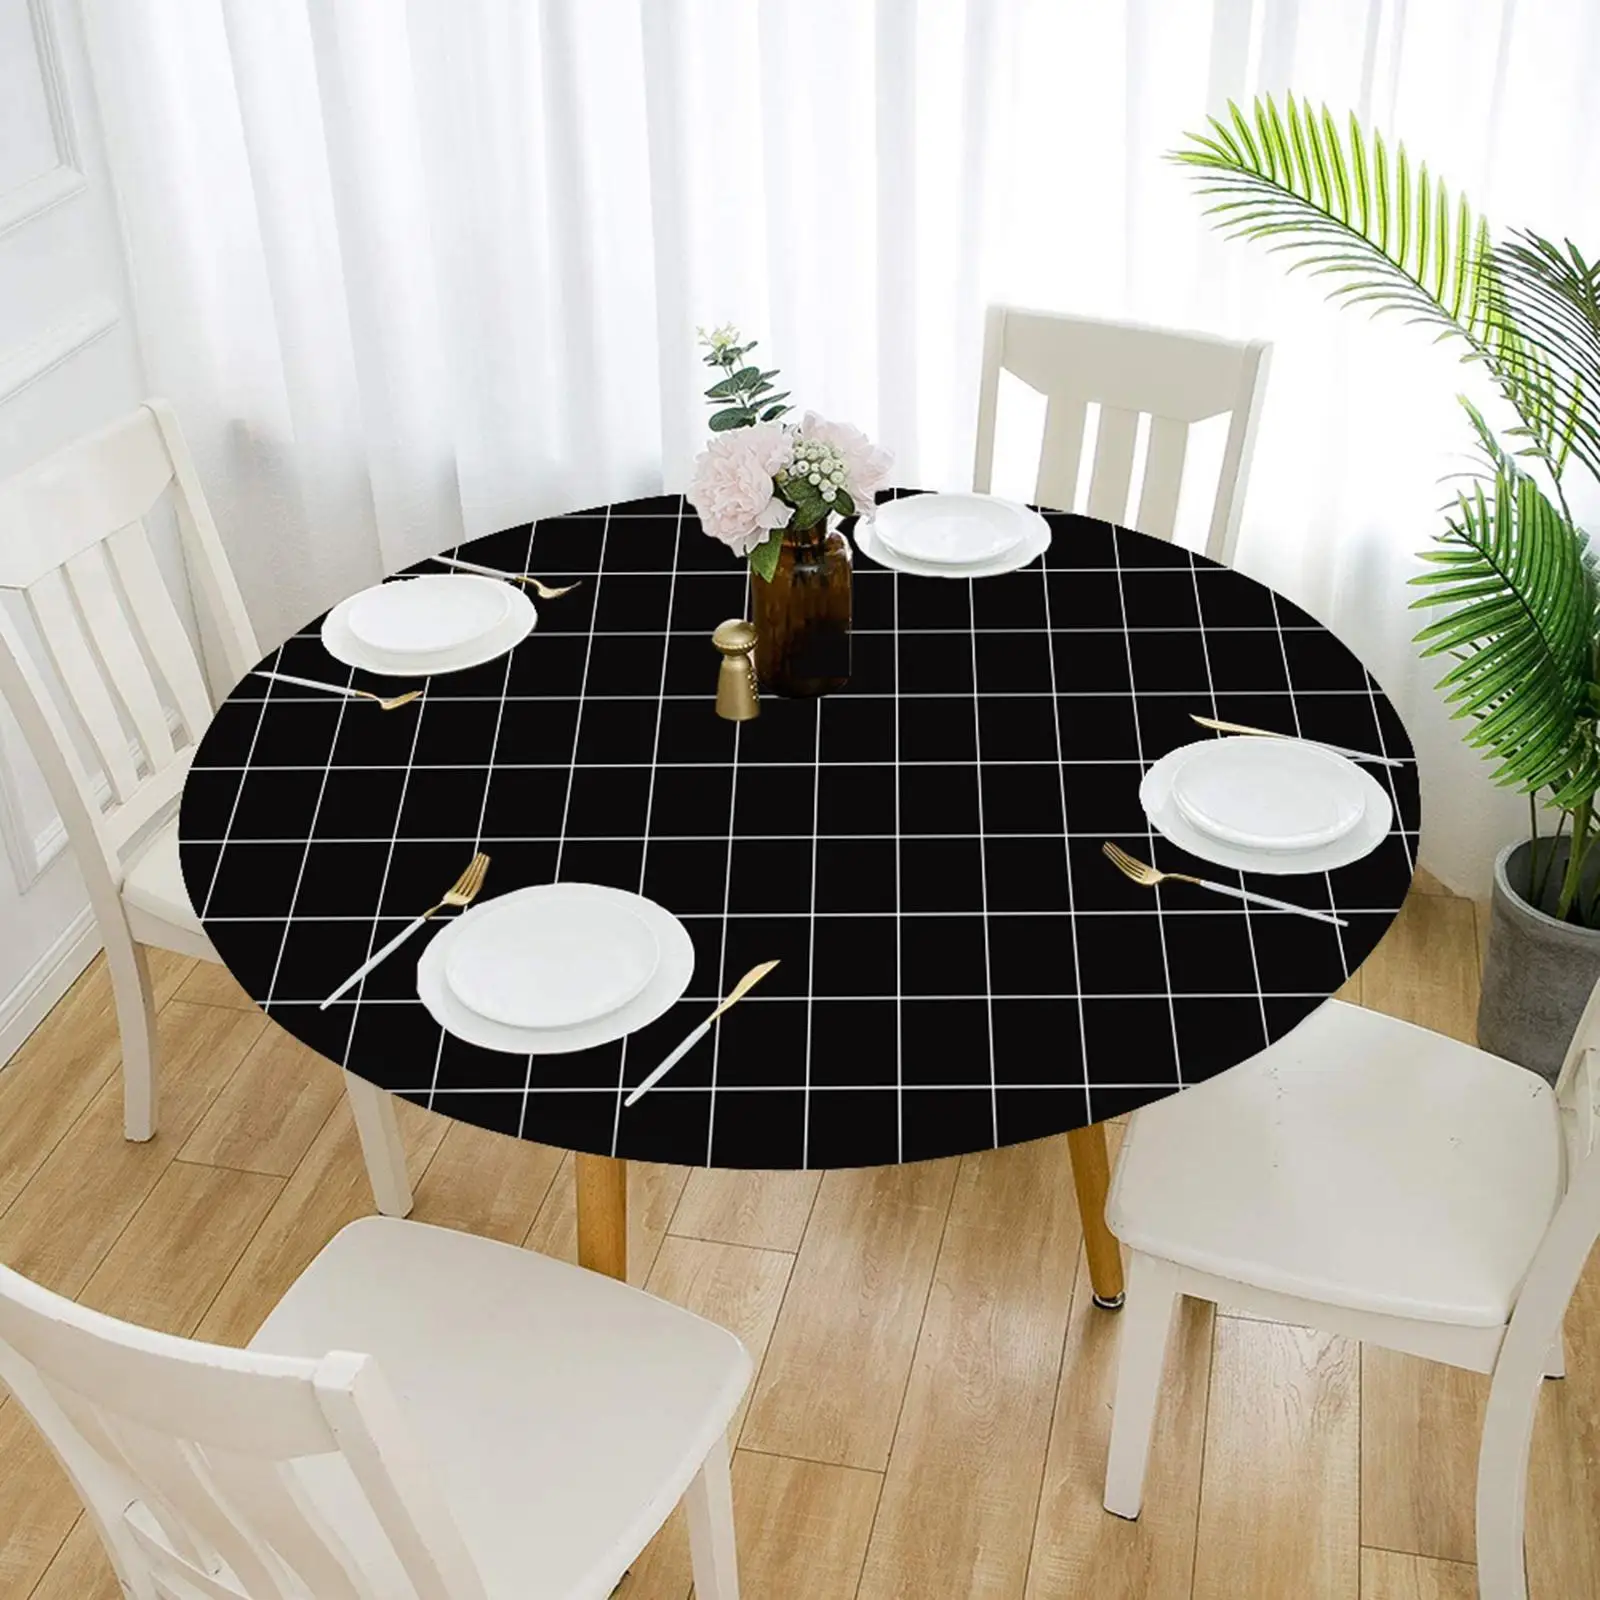 Fitted Polyester Table Cloth Elastic Edged Decoration Water Resistance Dinner Table Cover Dust Proof Protector Wipe Clean